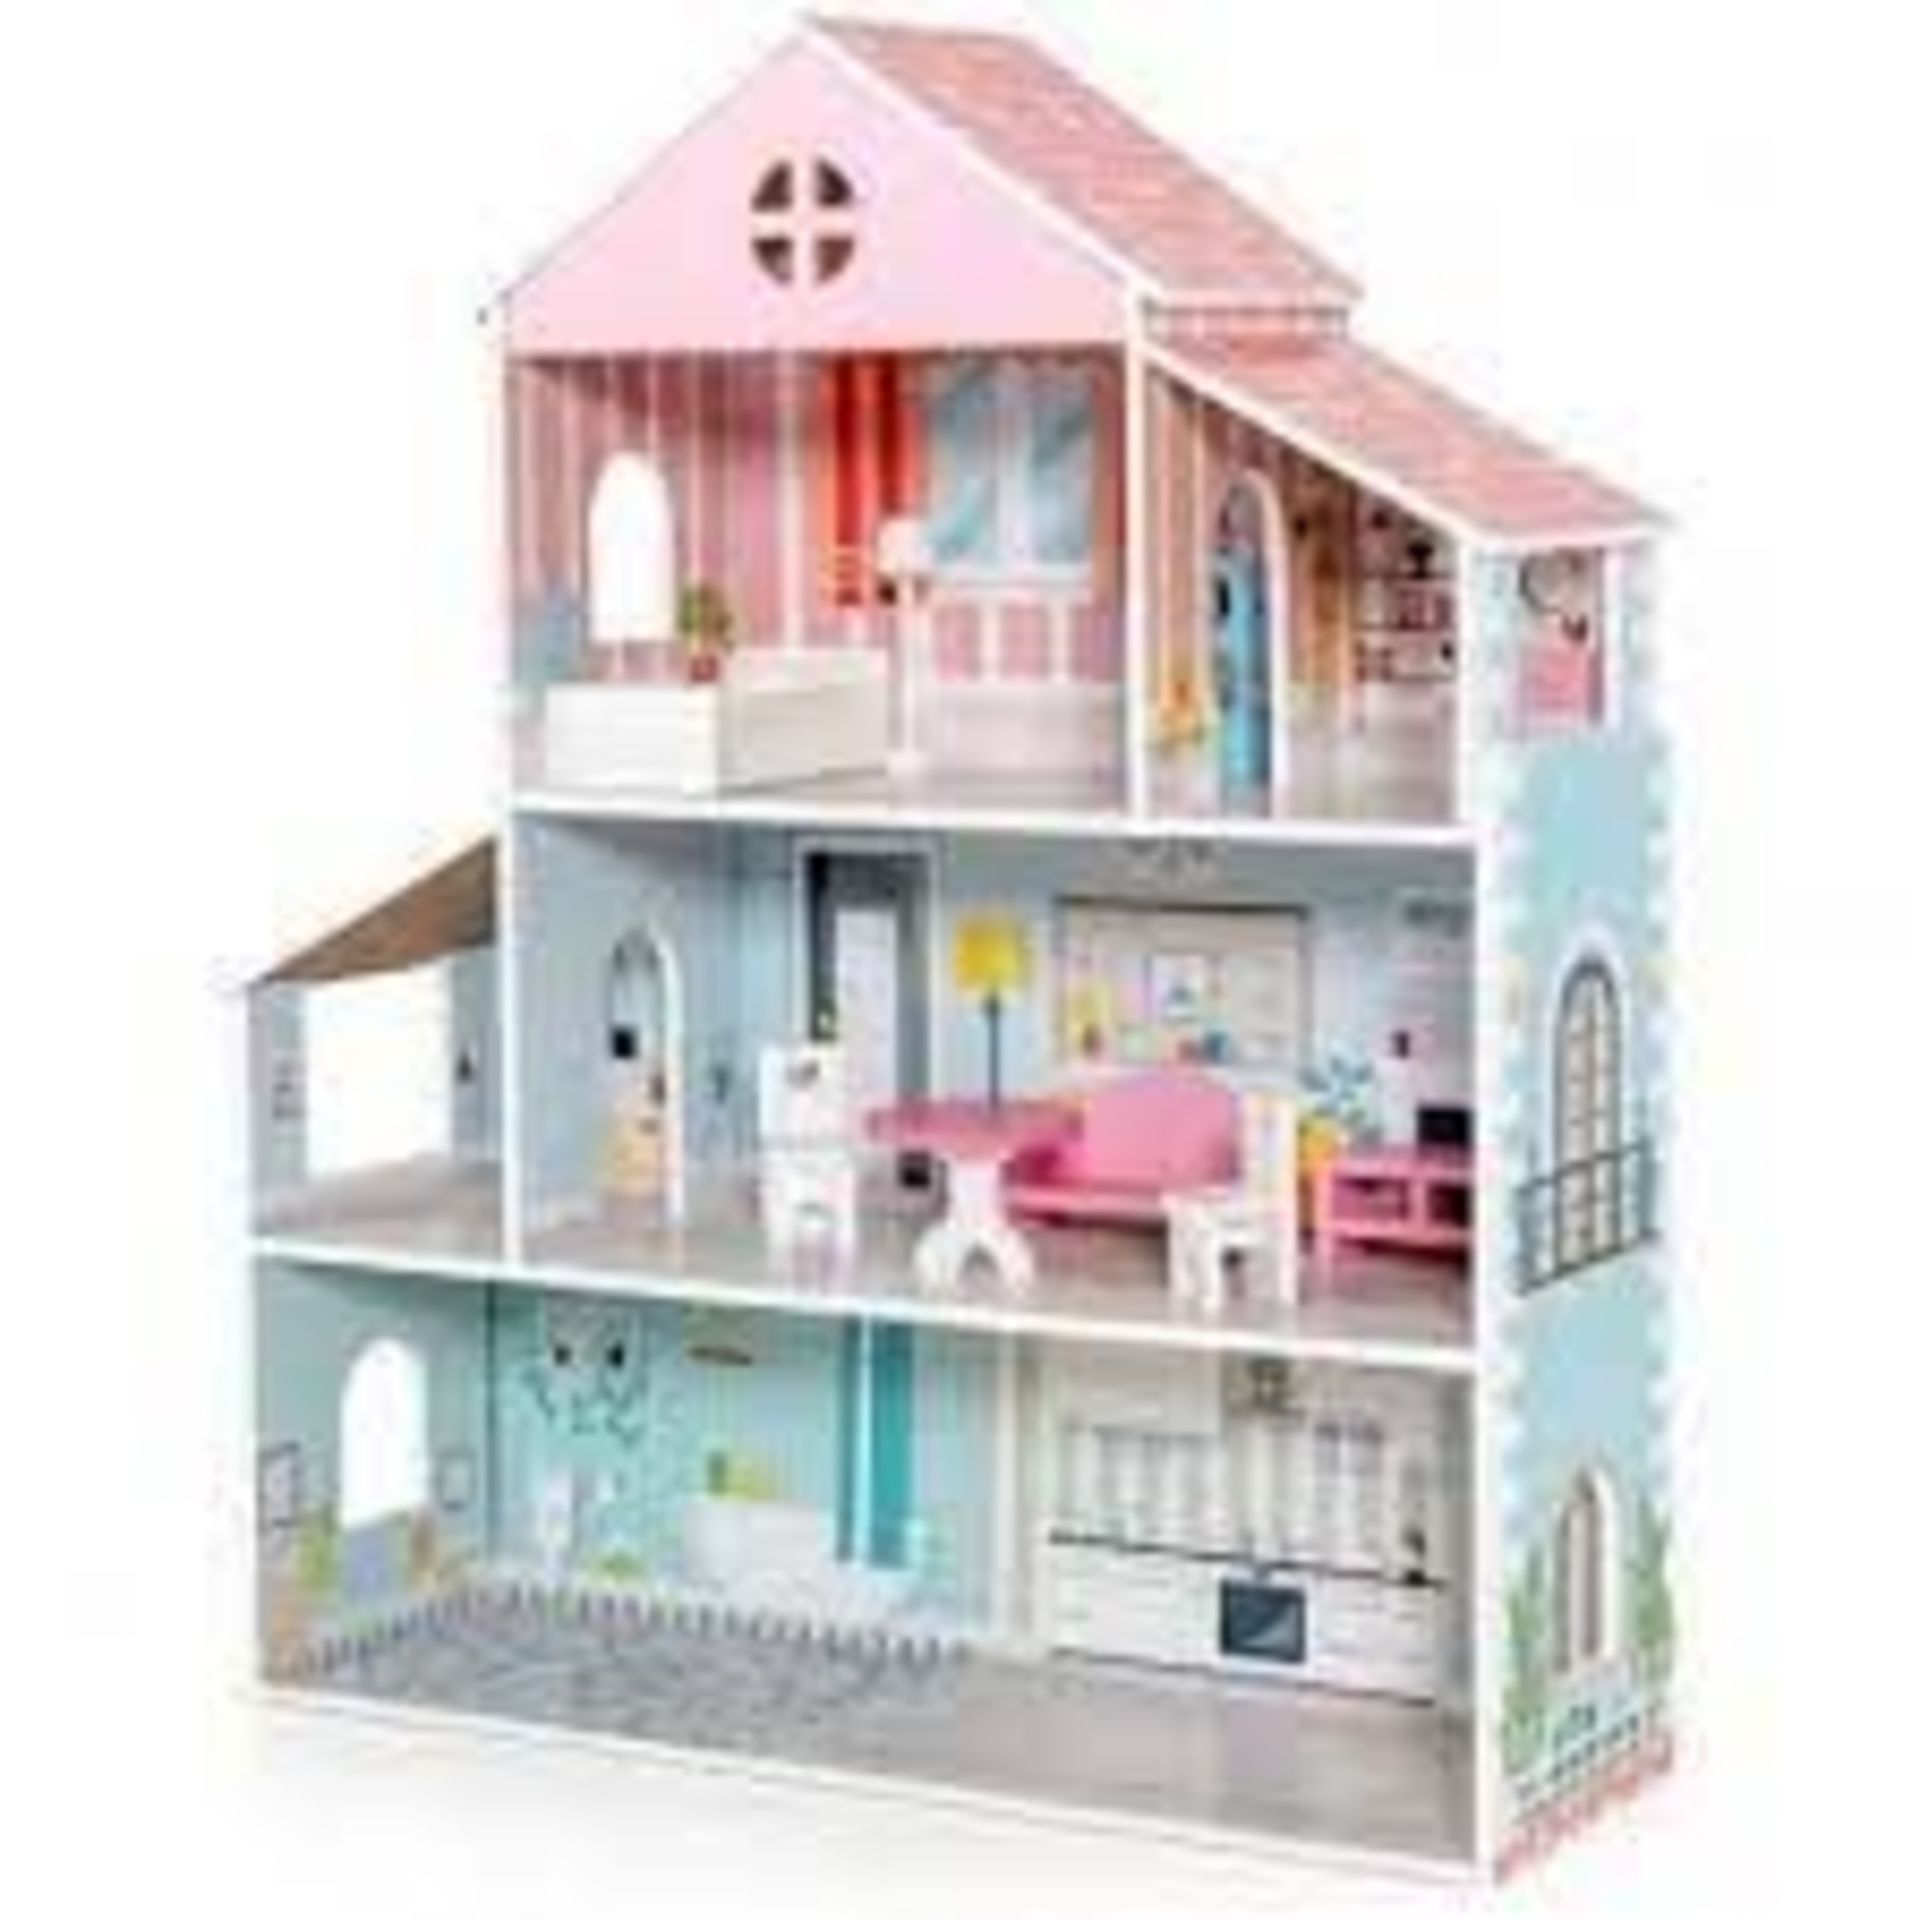 Wooden Dolls House with Furniture Accessories. - ER53. This lifelike dollhouse can bring endless fun